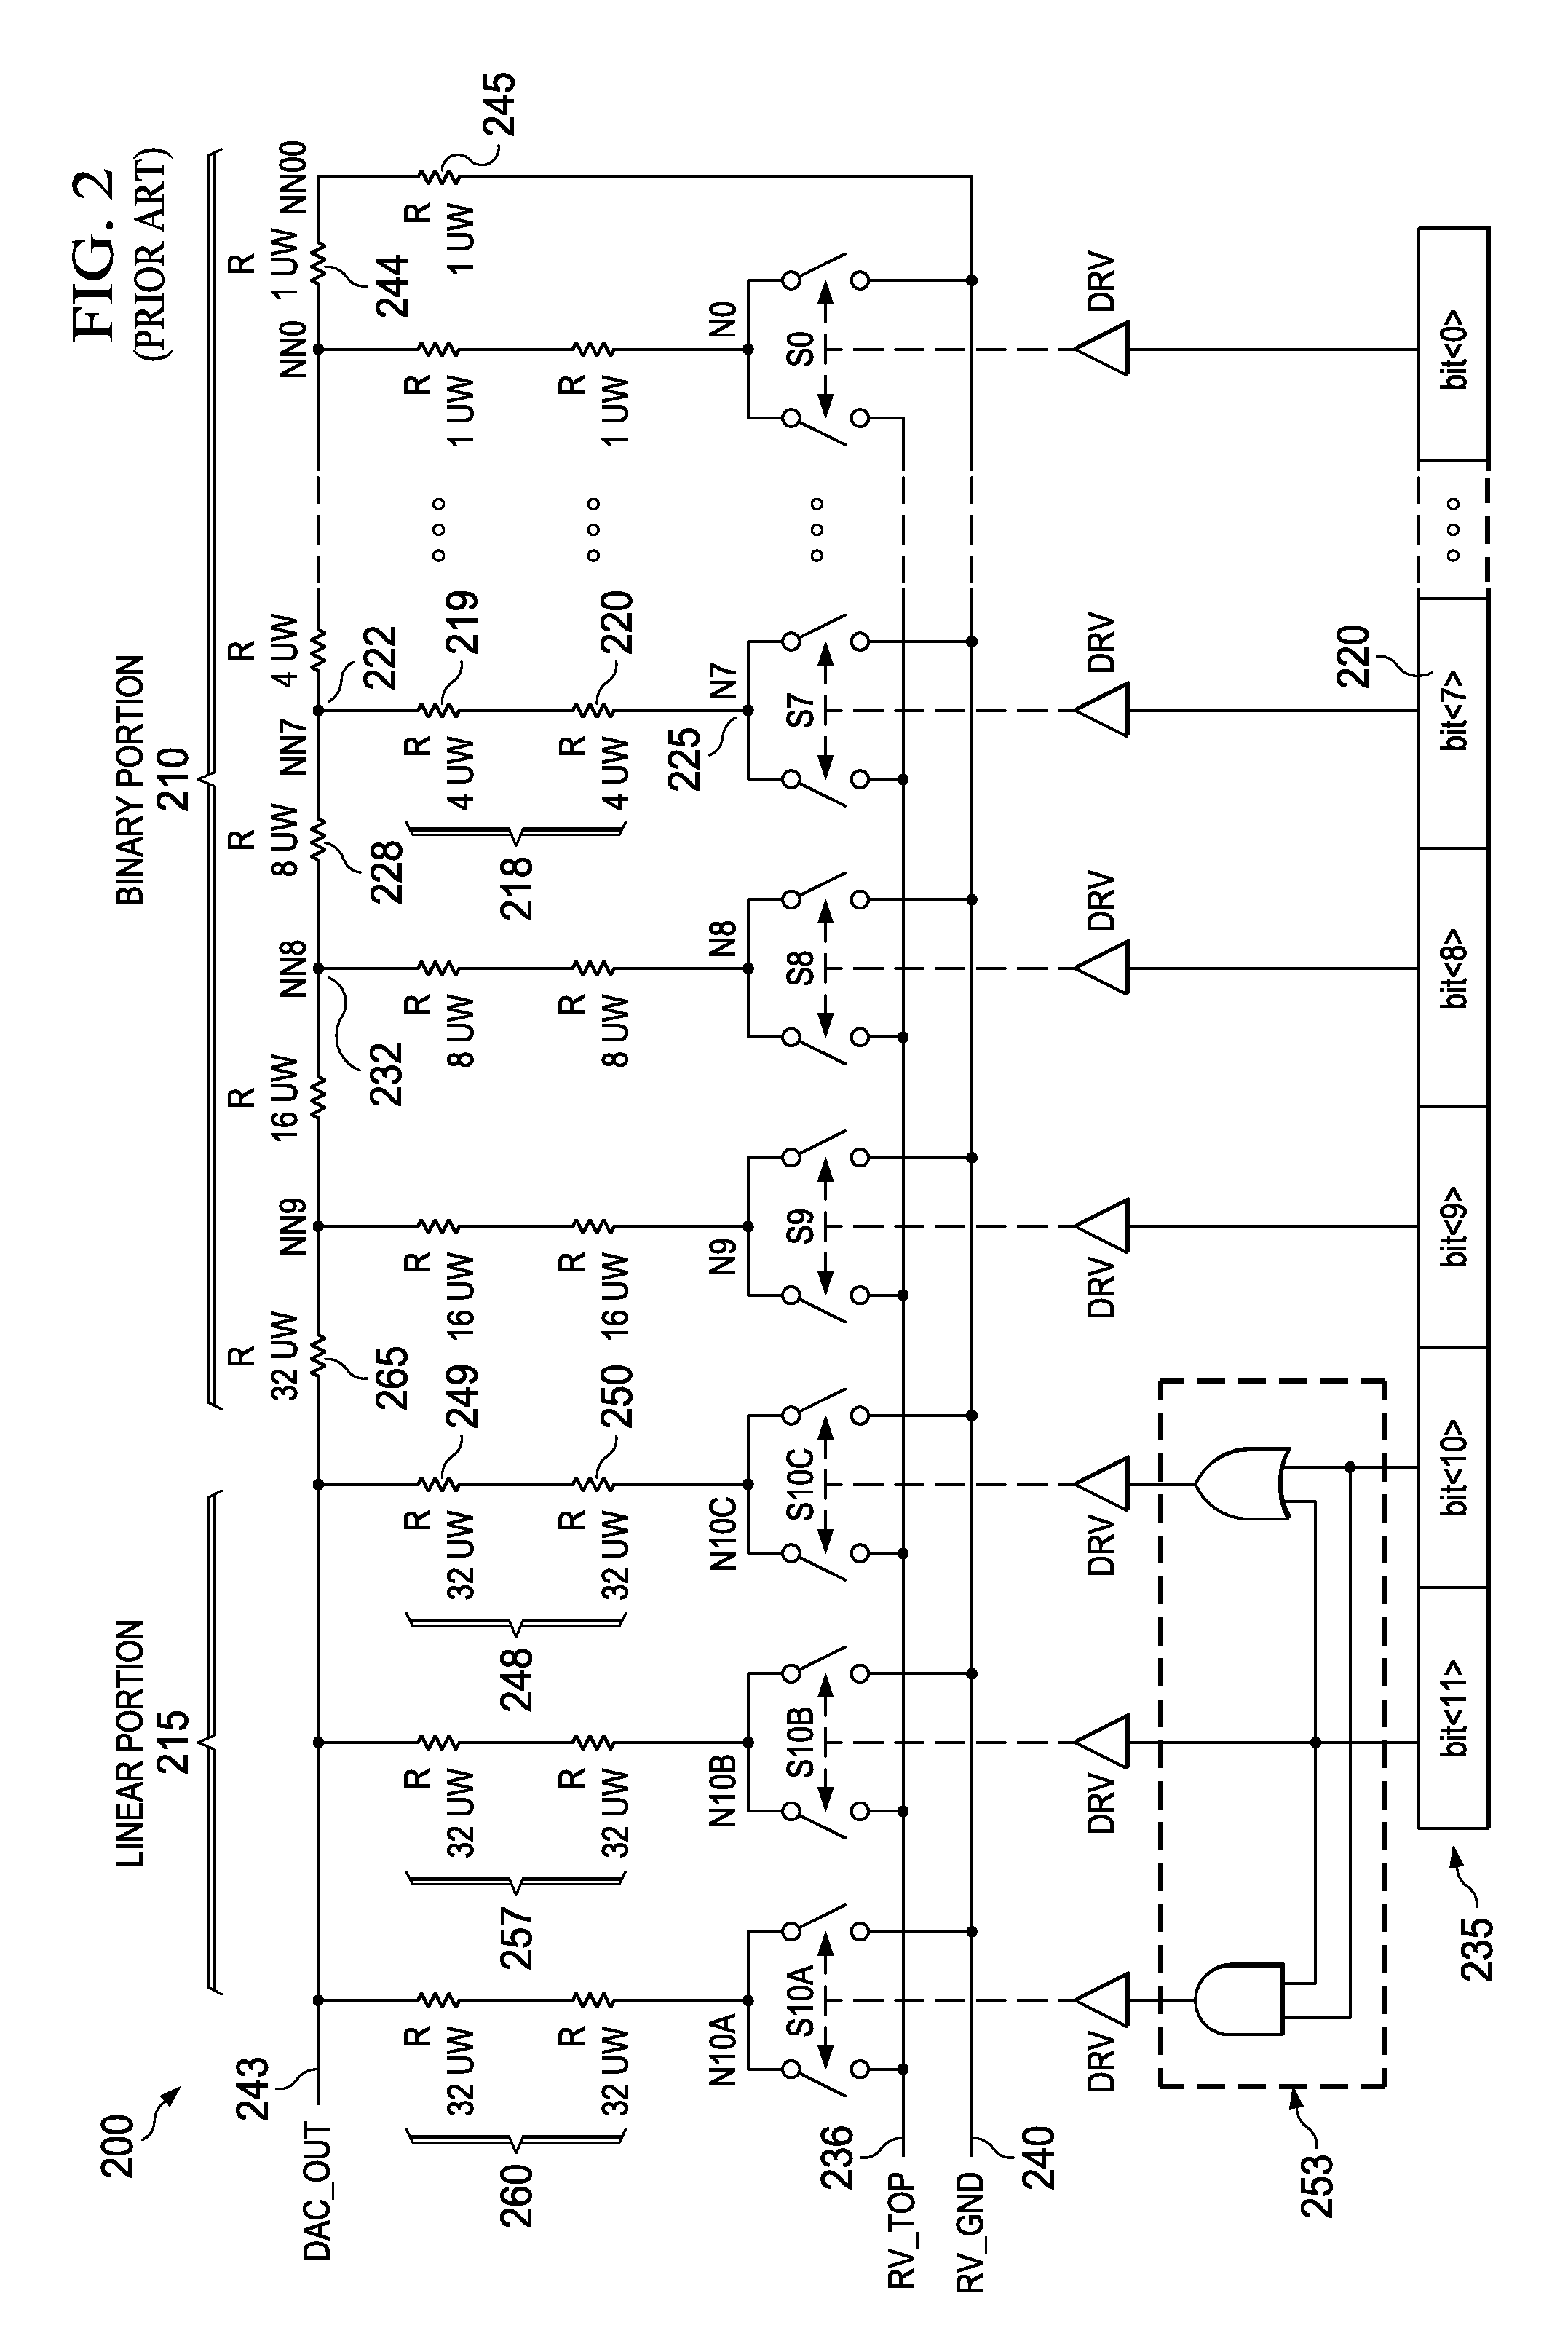 Trim-matched segmented digital-to-analog converter apparatus, systems and methods